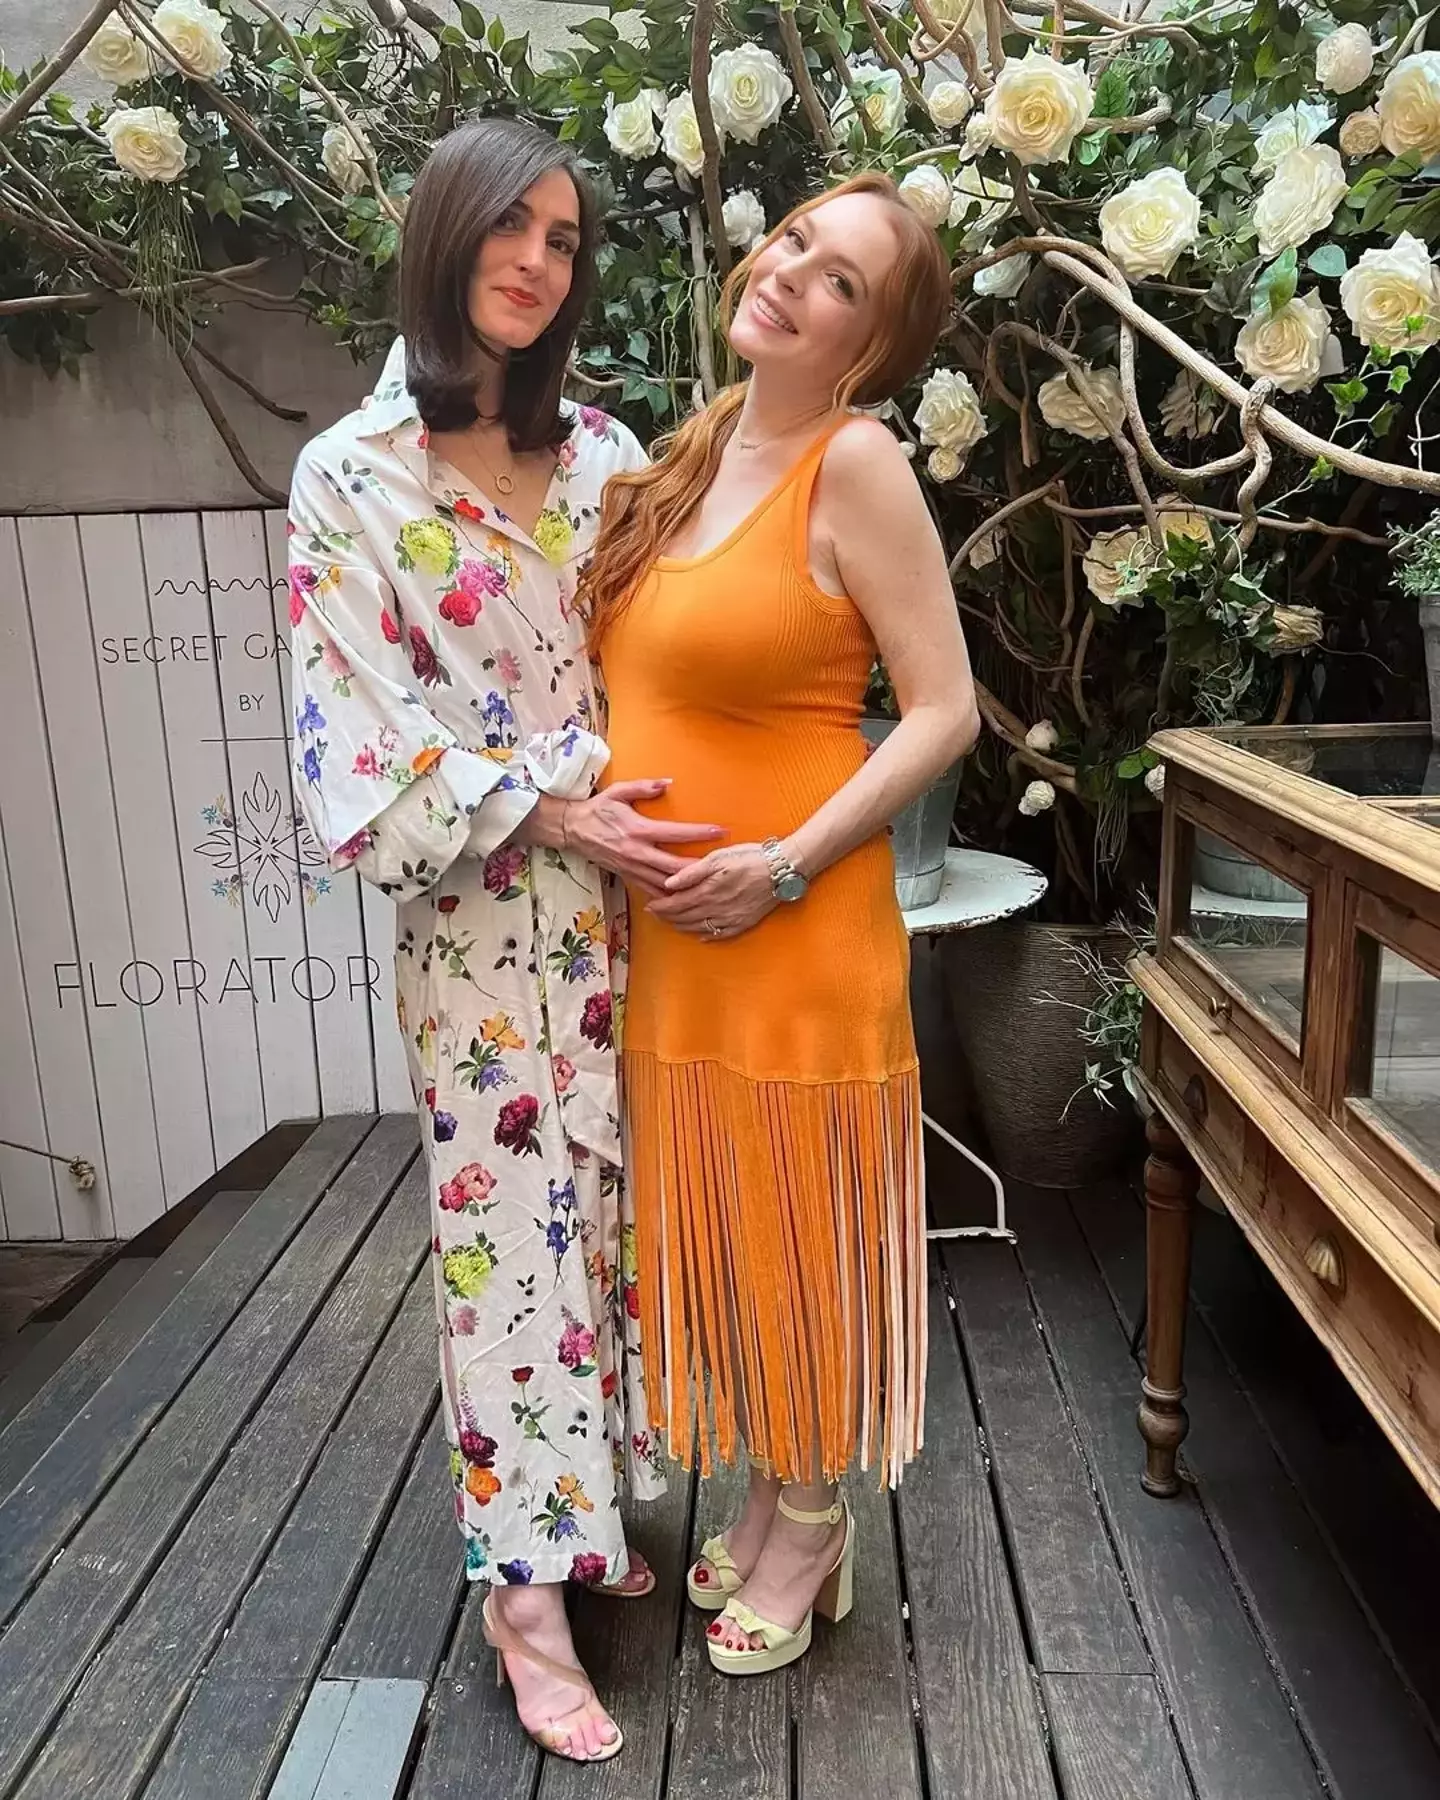 The star shared photos from her baby shower the following month.